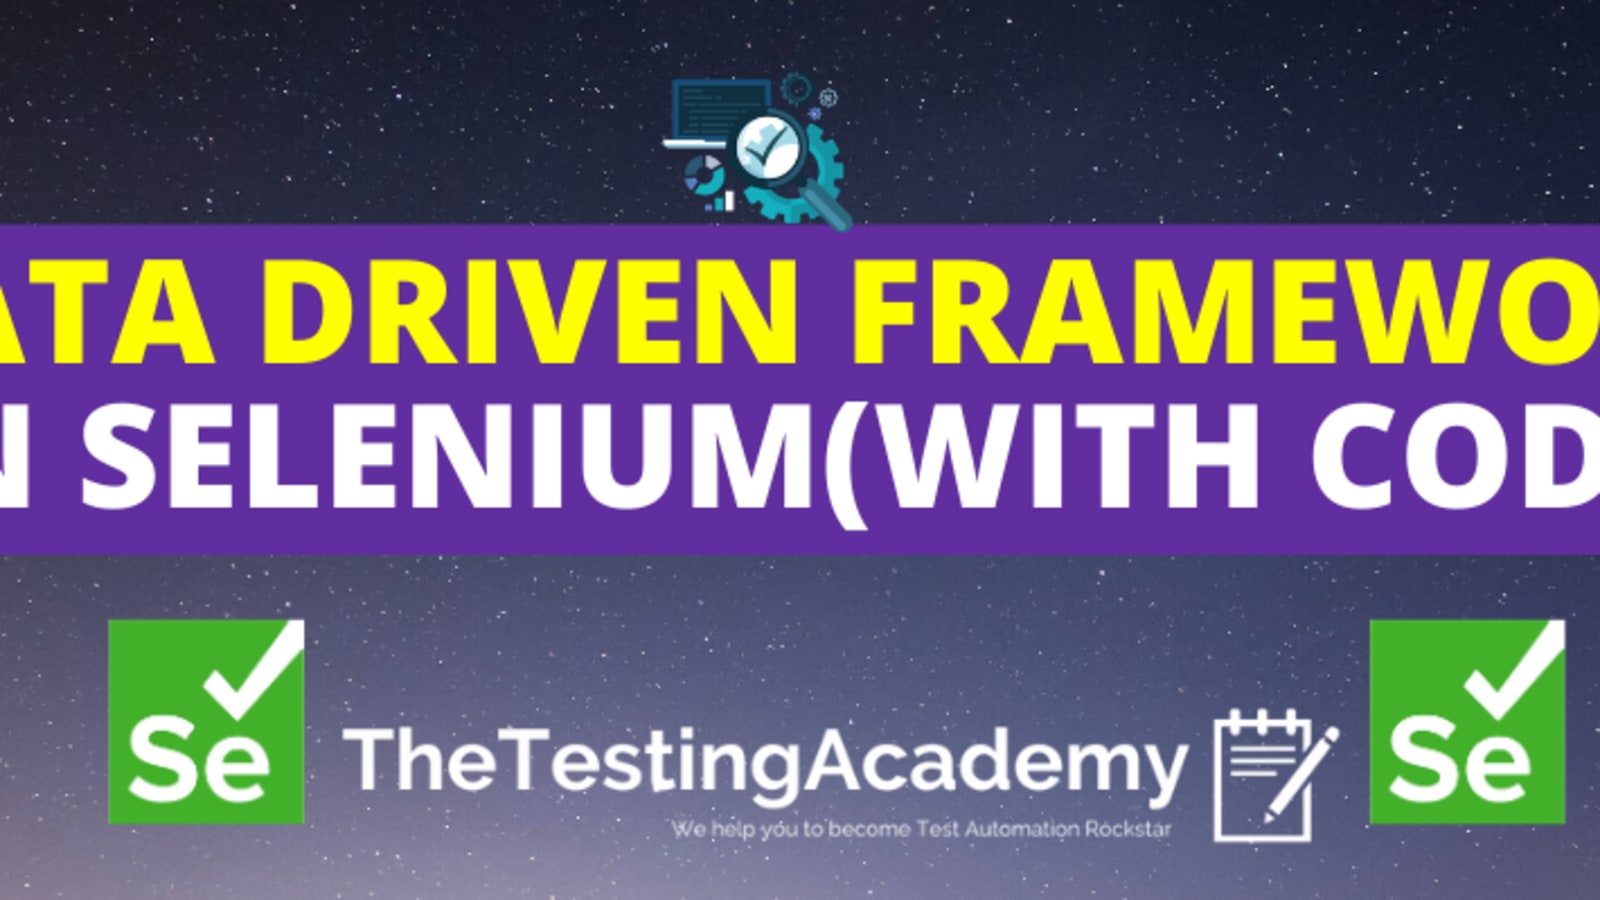 Data driven testing in Selenium WebDriver – Use of Apache POI to